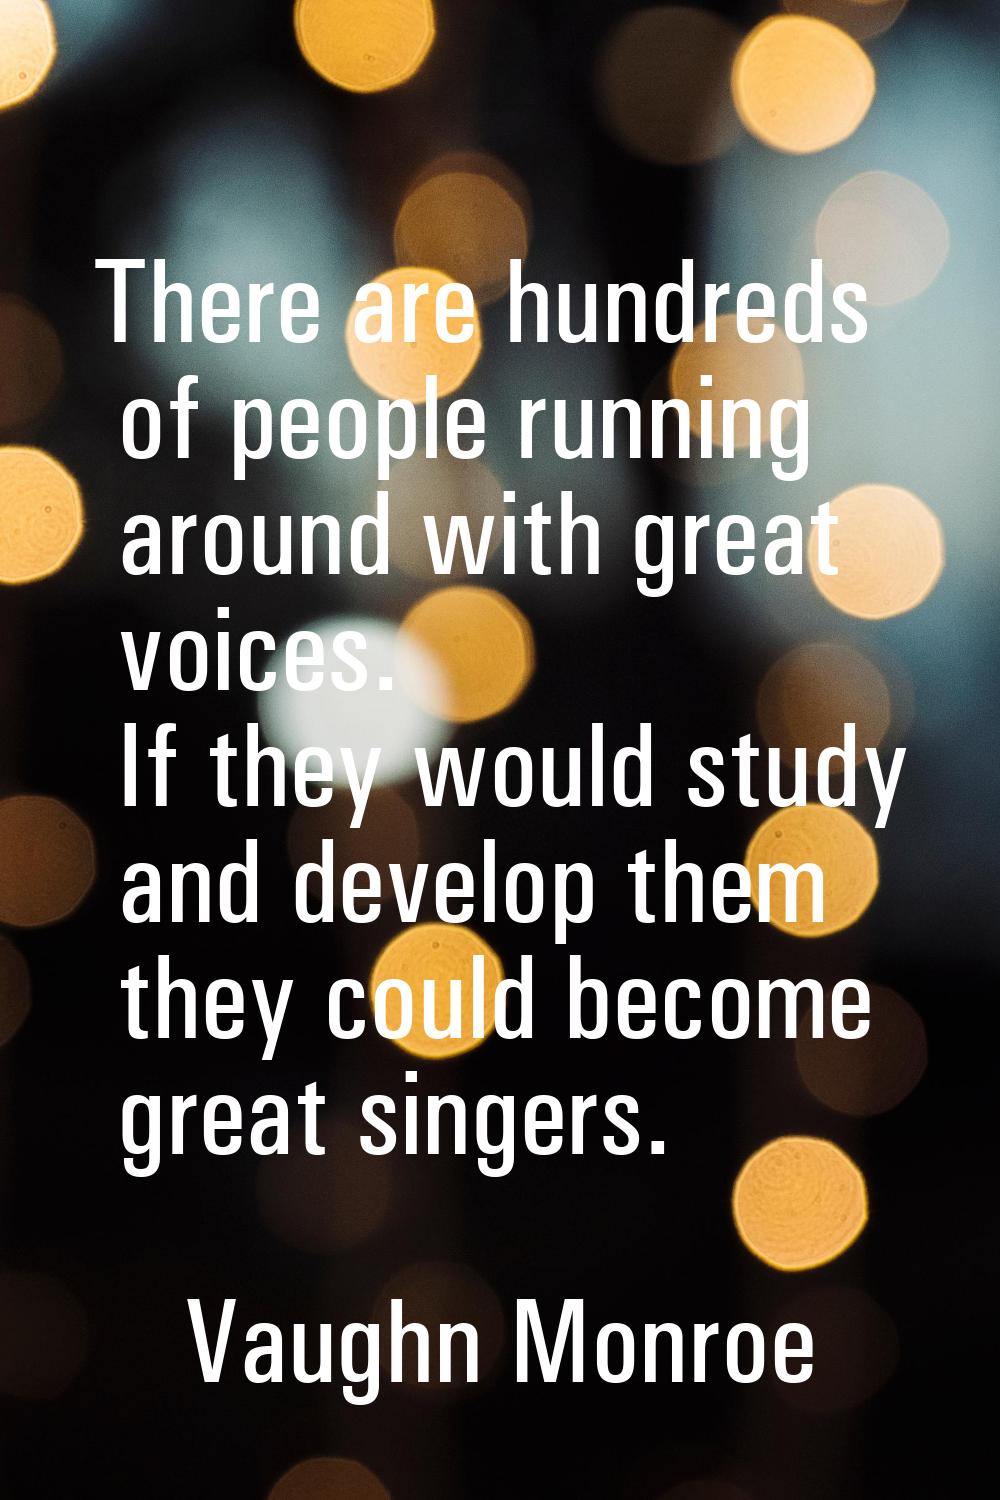 There are hundreds of people running around with great voices. If they would study and develop them